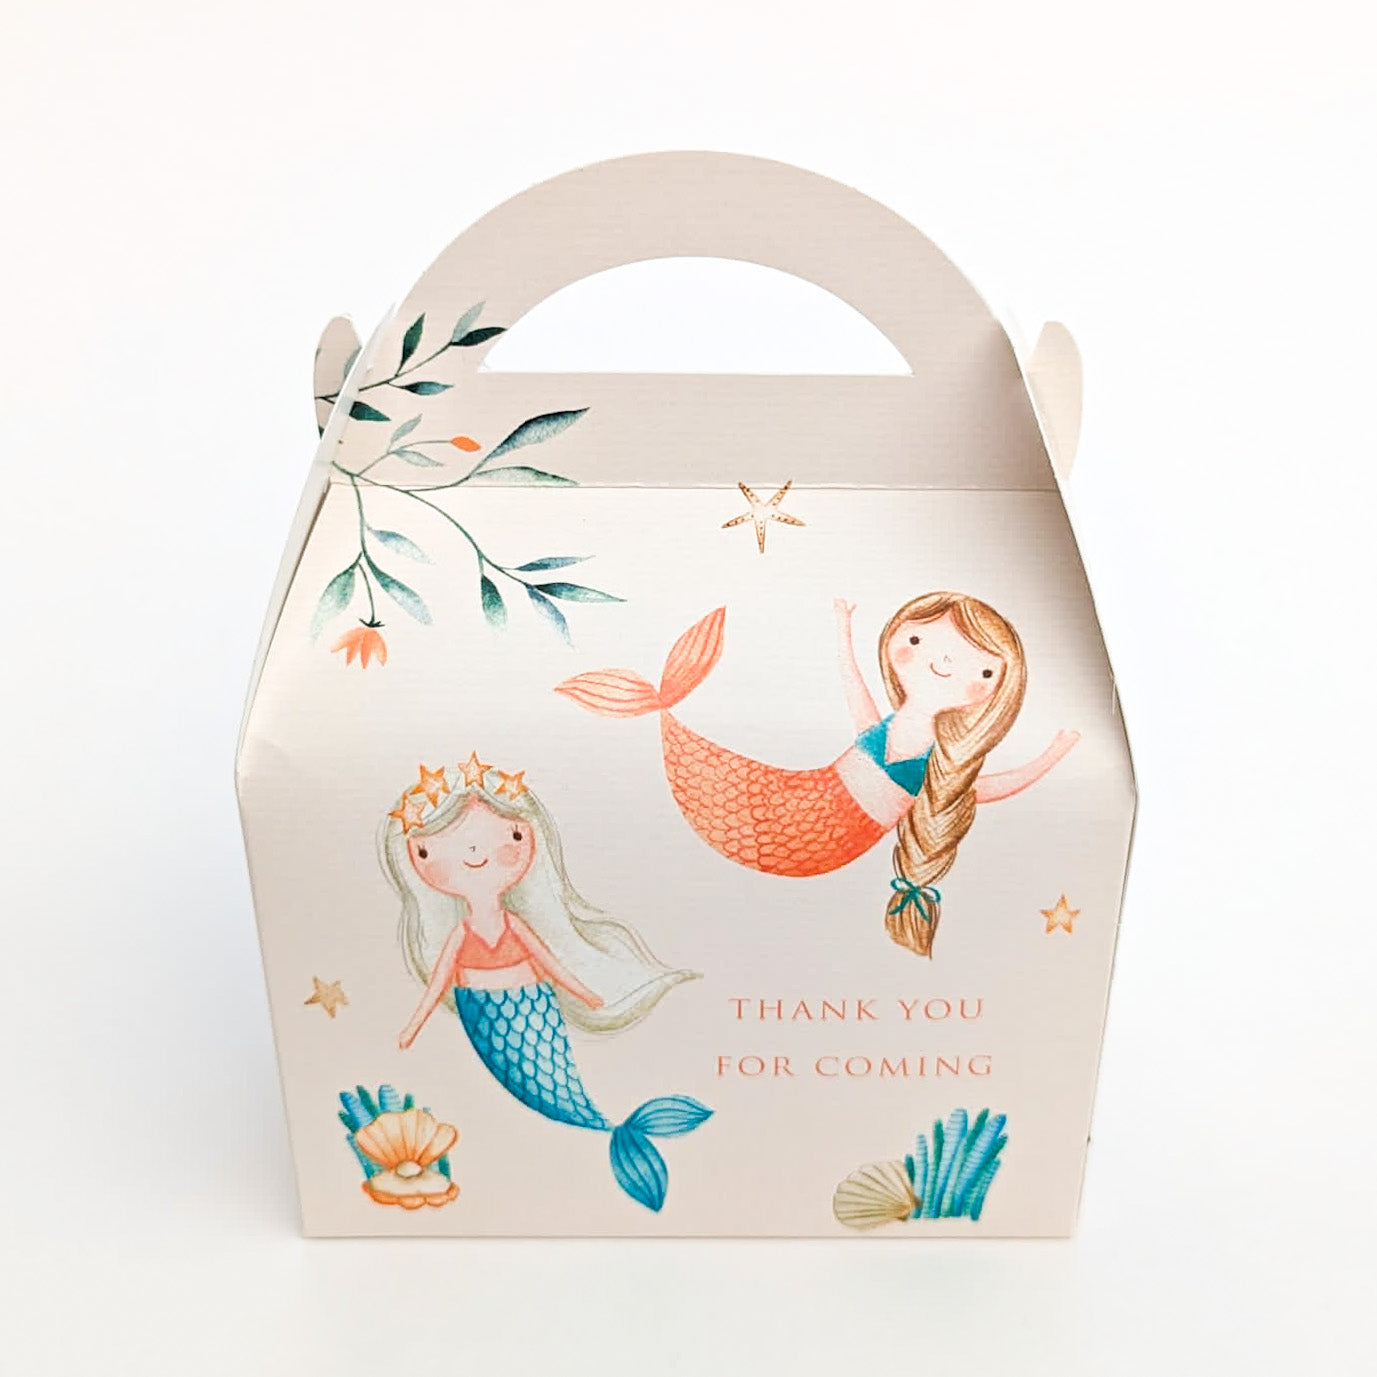 MERMAID Personalised Children’s Party Box Gift Bag Favour